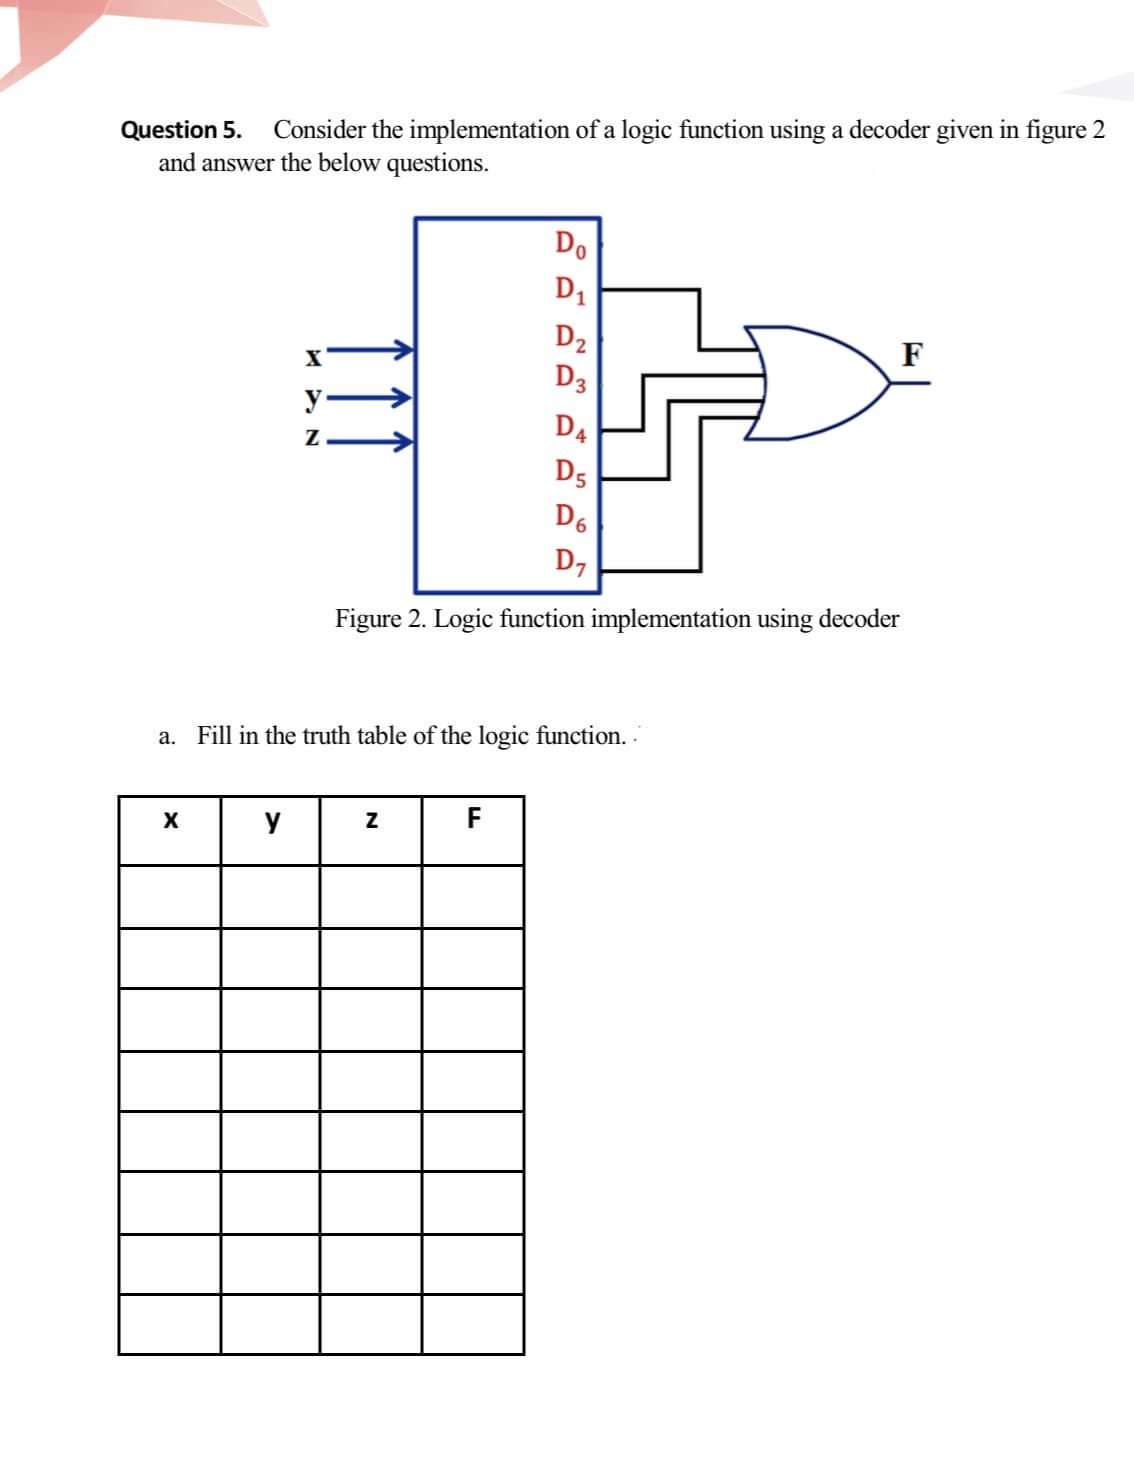 Question 5.
Consider the implementation of a logic function using a decoder given in figure 2
and answer the below questions.
Do
D1
D2
D3
F
D4
D5
D6
D7
Figure 2. Logic function implementation using decoder
a. Fill in the truth table of the logic function.
F
y
